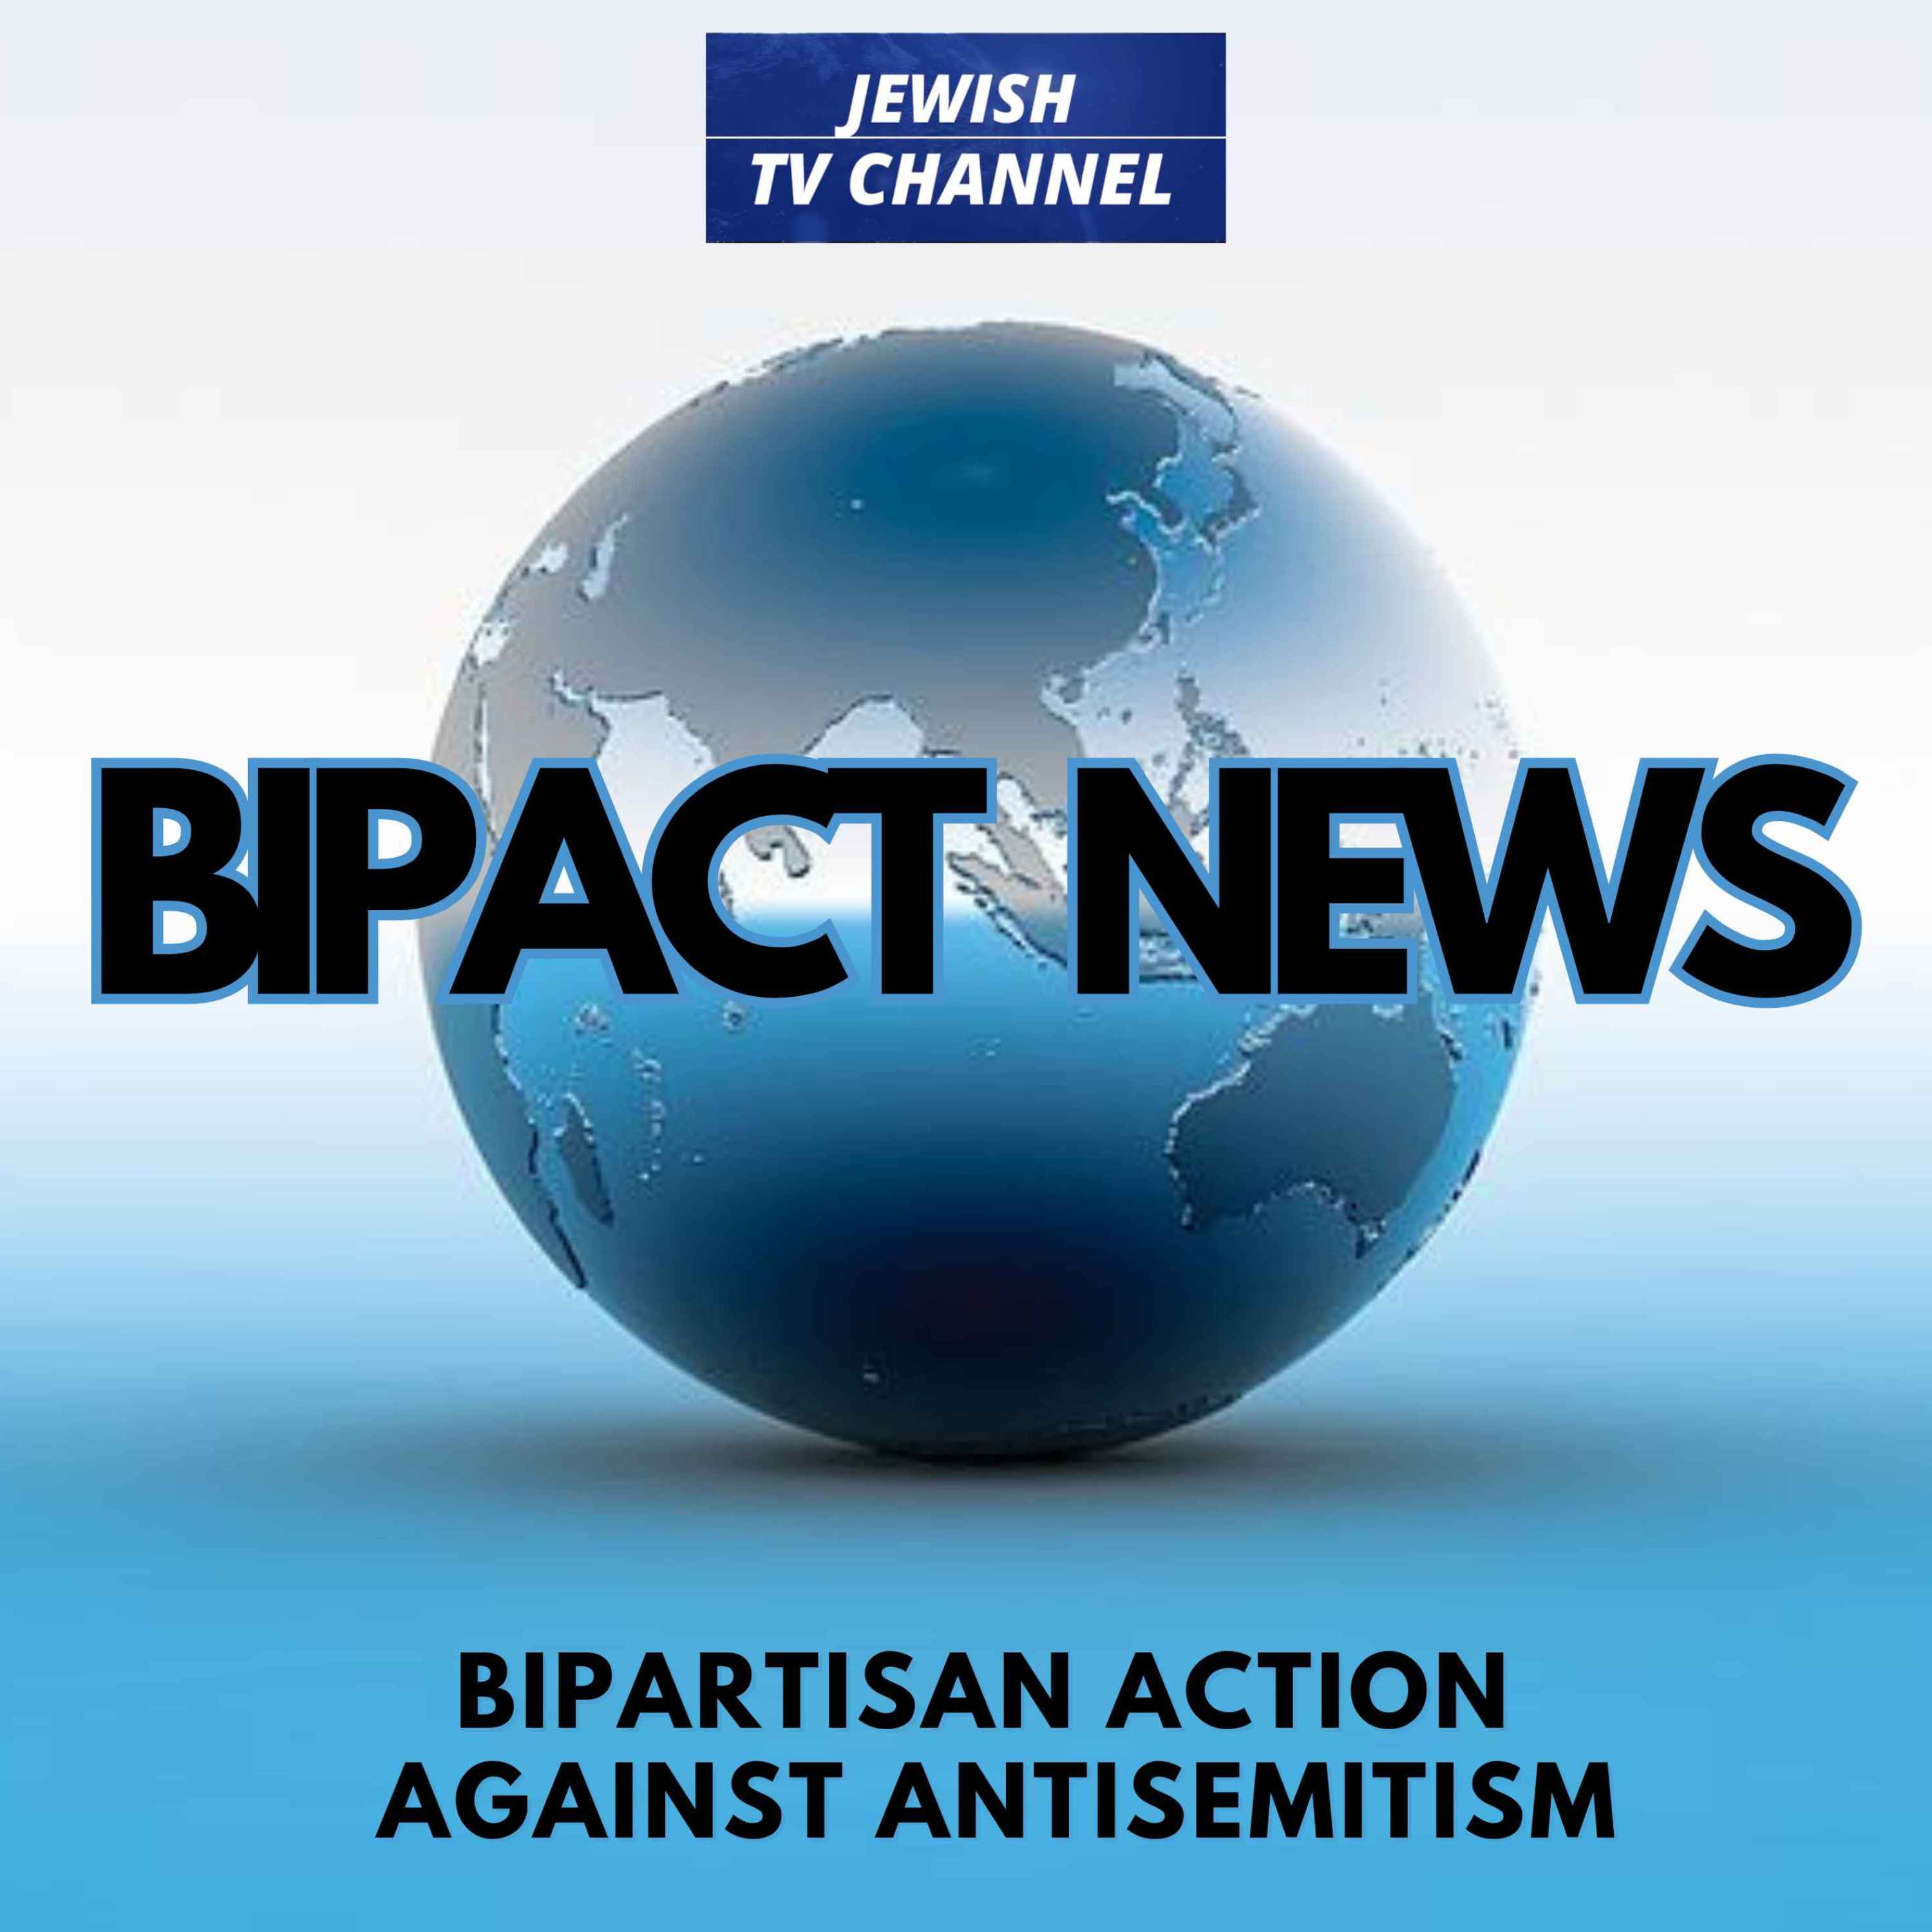 Show artwork for BIPACT NEWS on the JEWISH TV CHANNEL